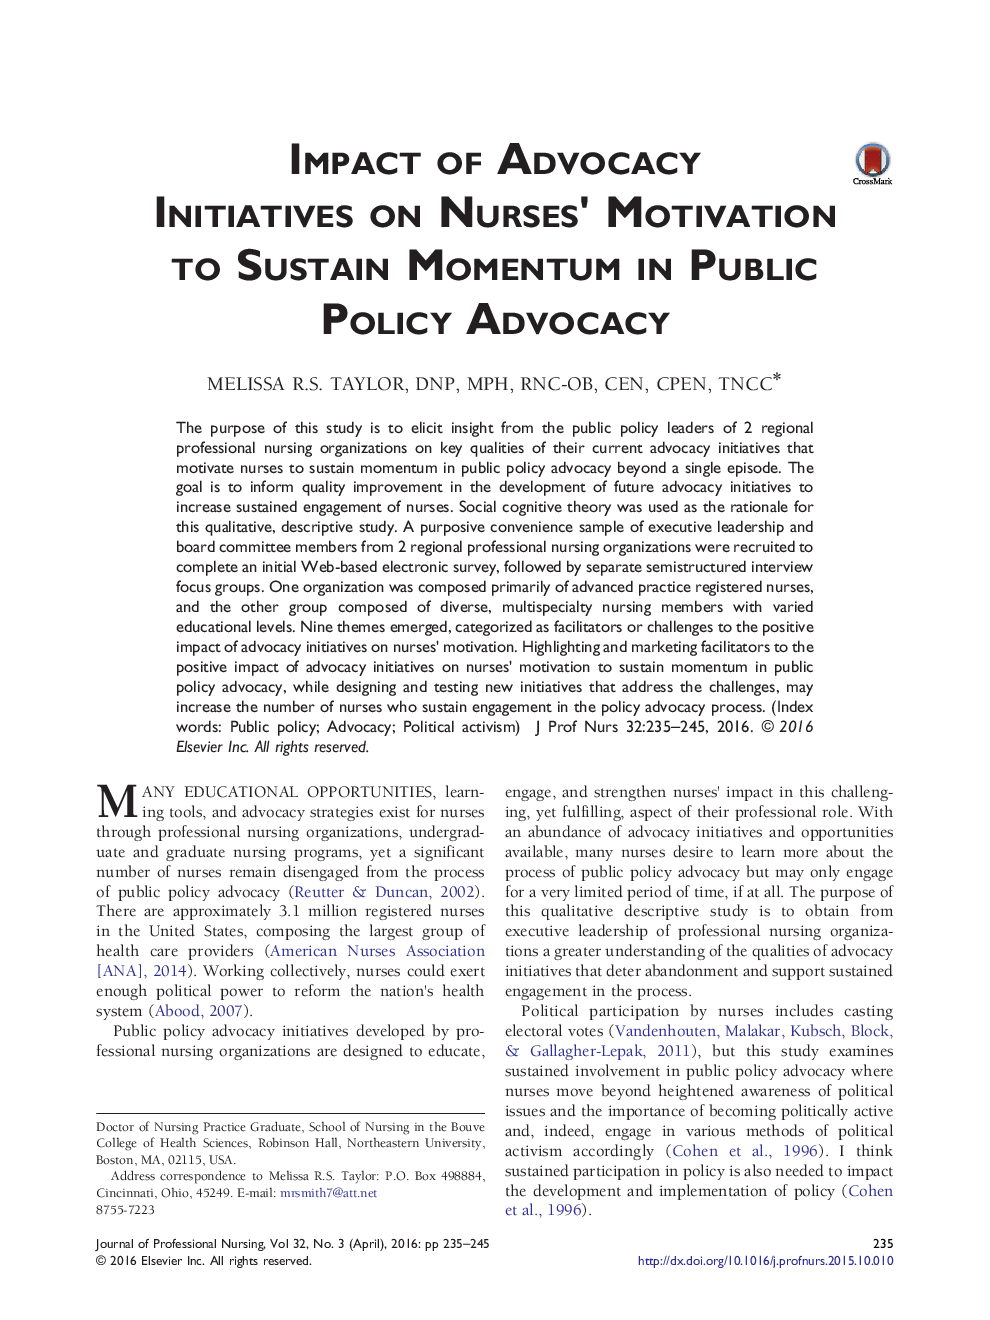 Impact of Advocacy Initiatives on Nurses' Motivation to Sustain Momentum in Public Policy Advocacy